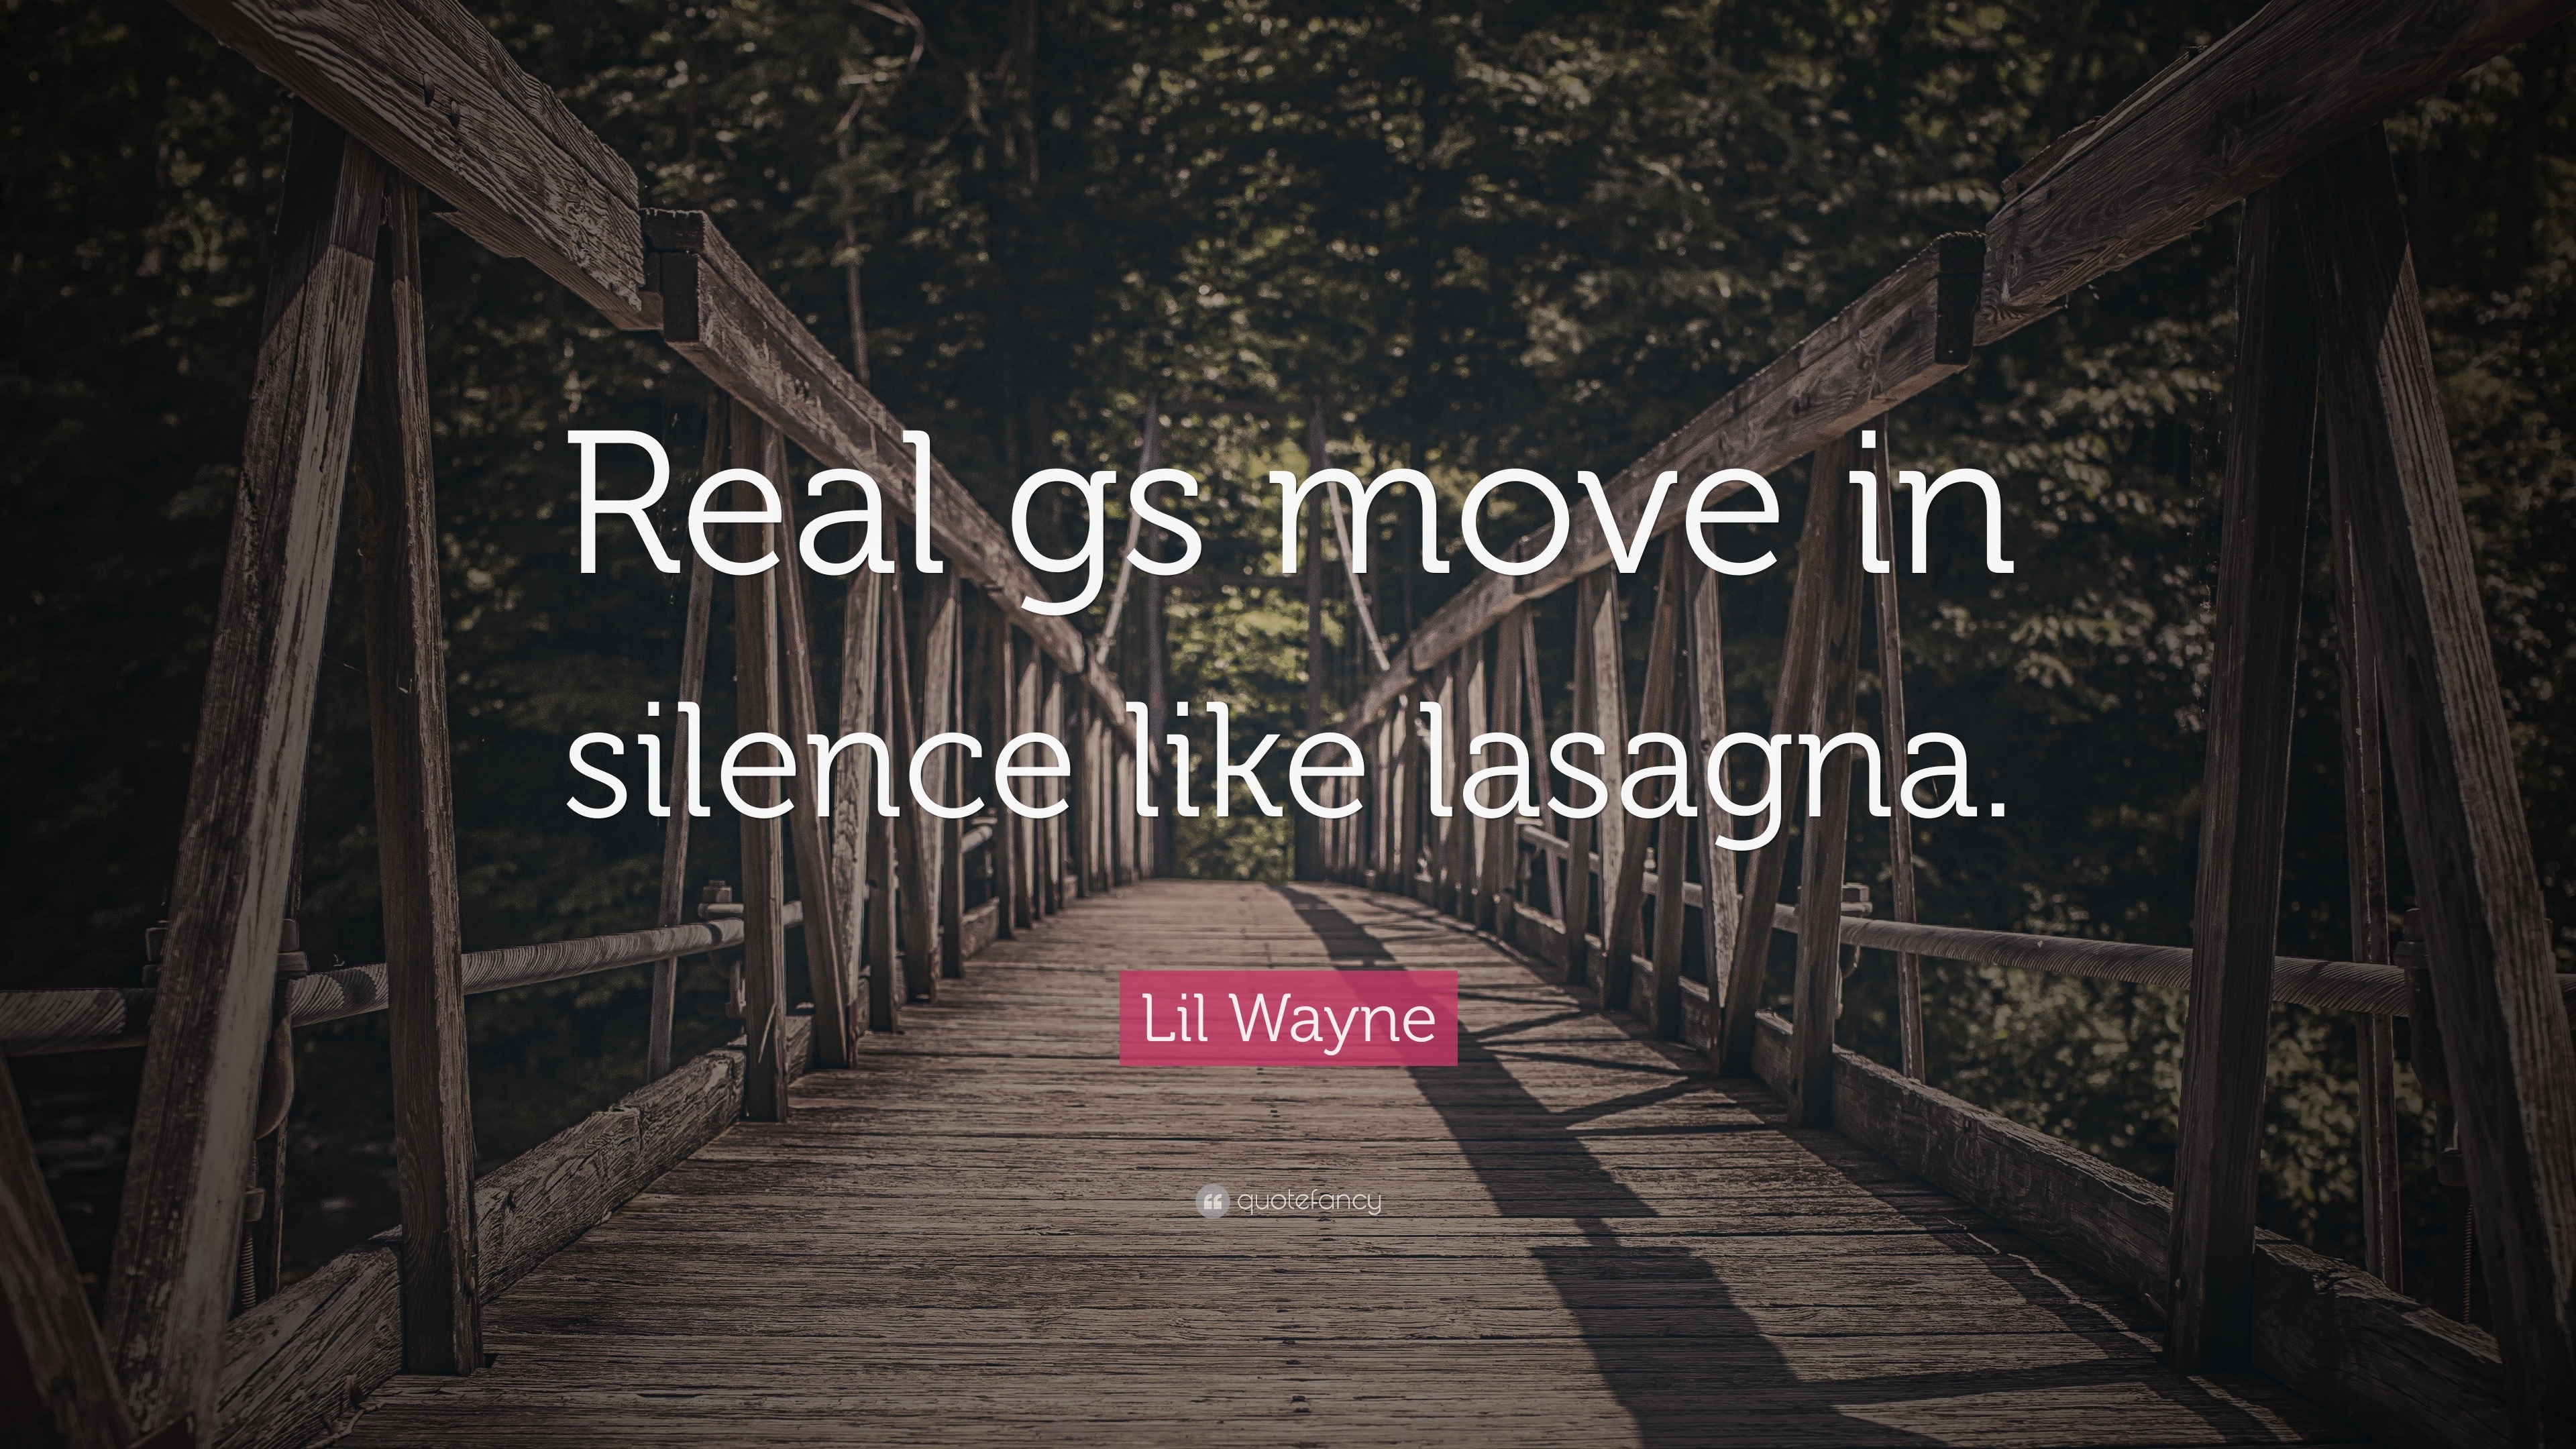 Lil Wayne Quote: "Real gs move in silence like lasagna."